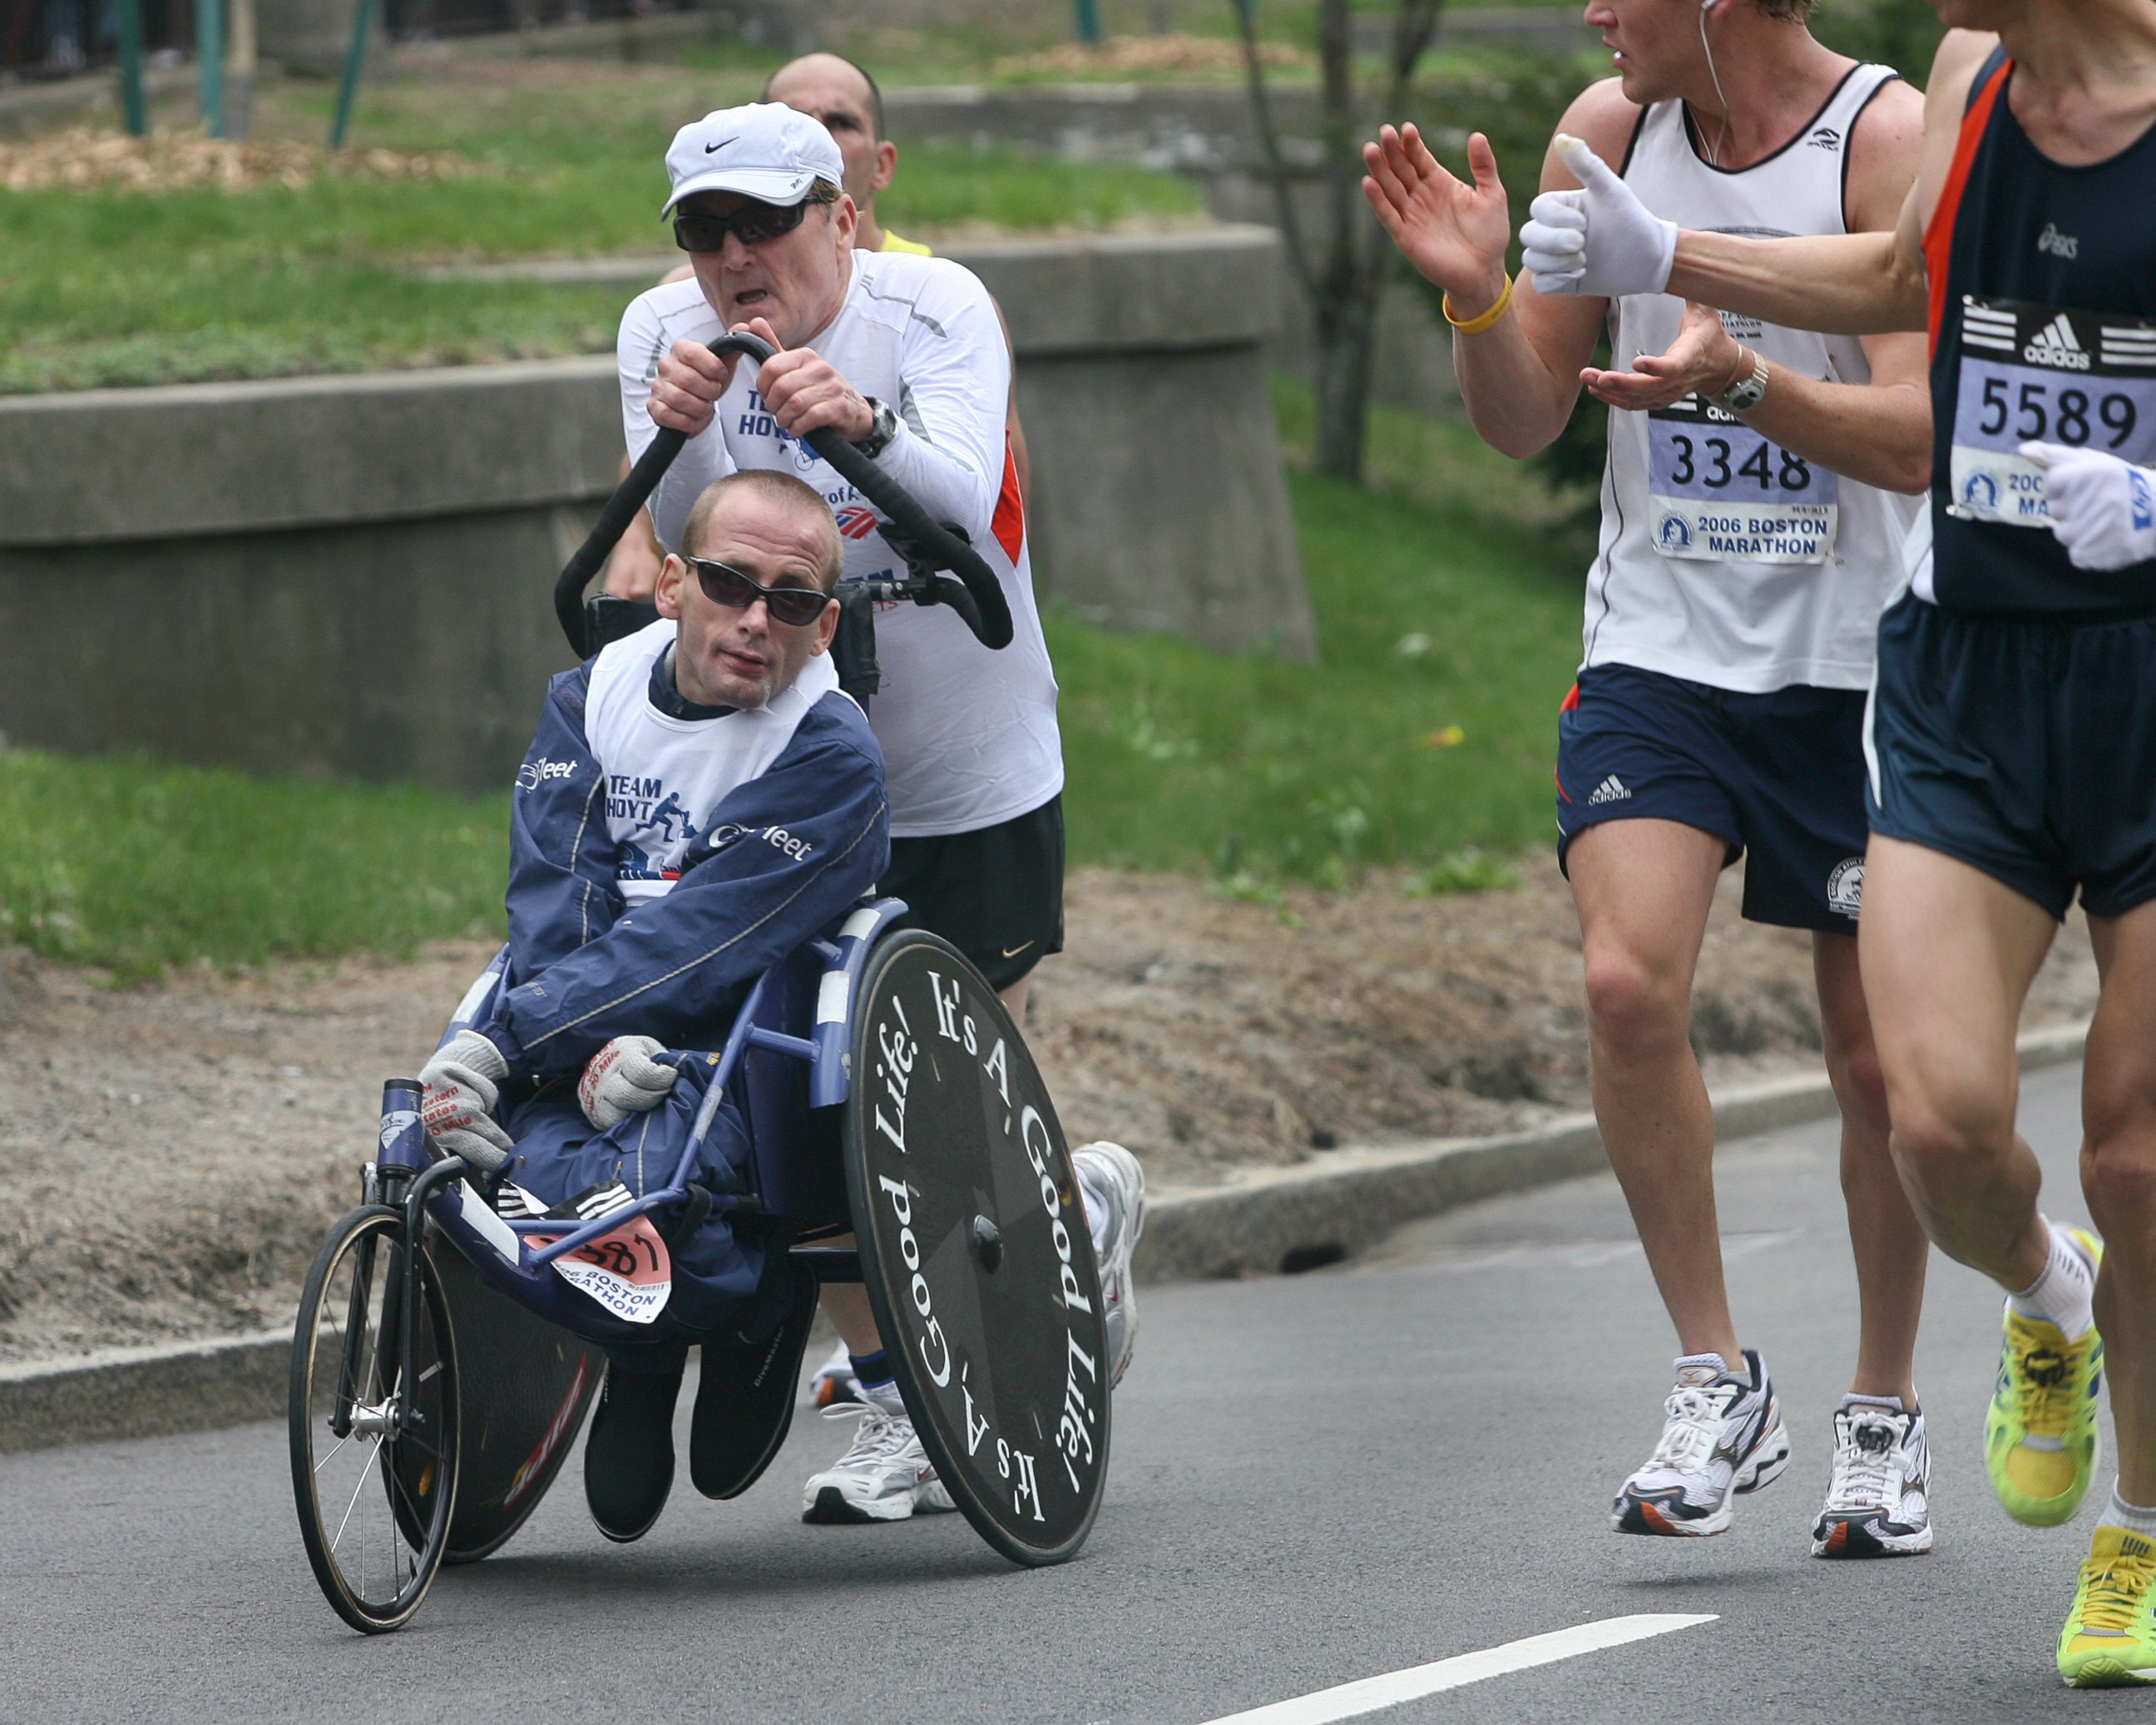 PHOTO: Dick and Rick Hoyt get encouragement from other competitors on Commonwealth Avenue near mile 25.4 during the running of the 110th Boston Marathon on April 17, 2006.